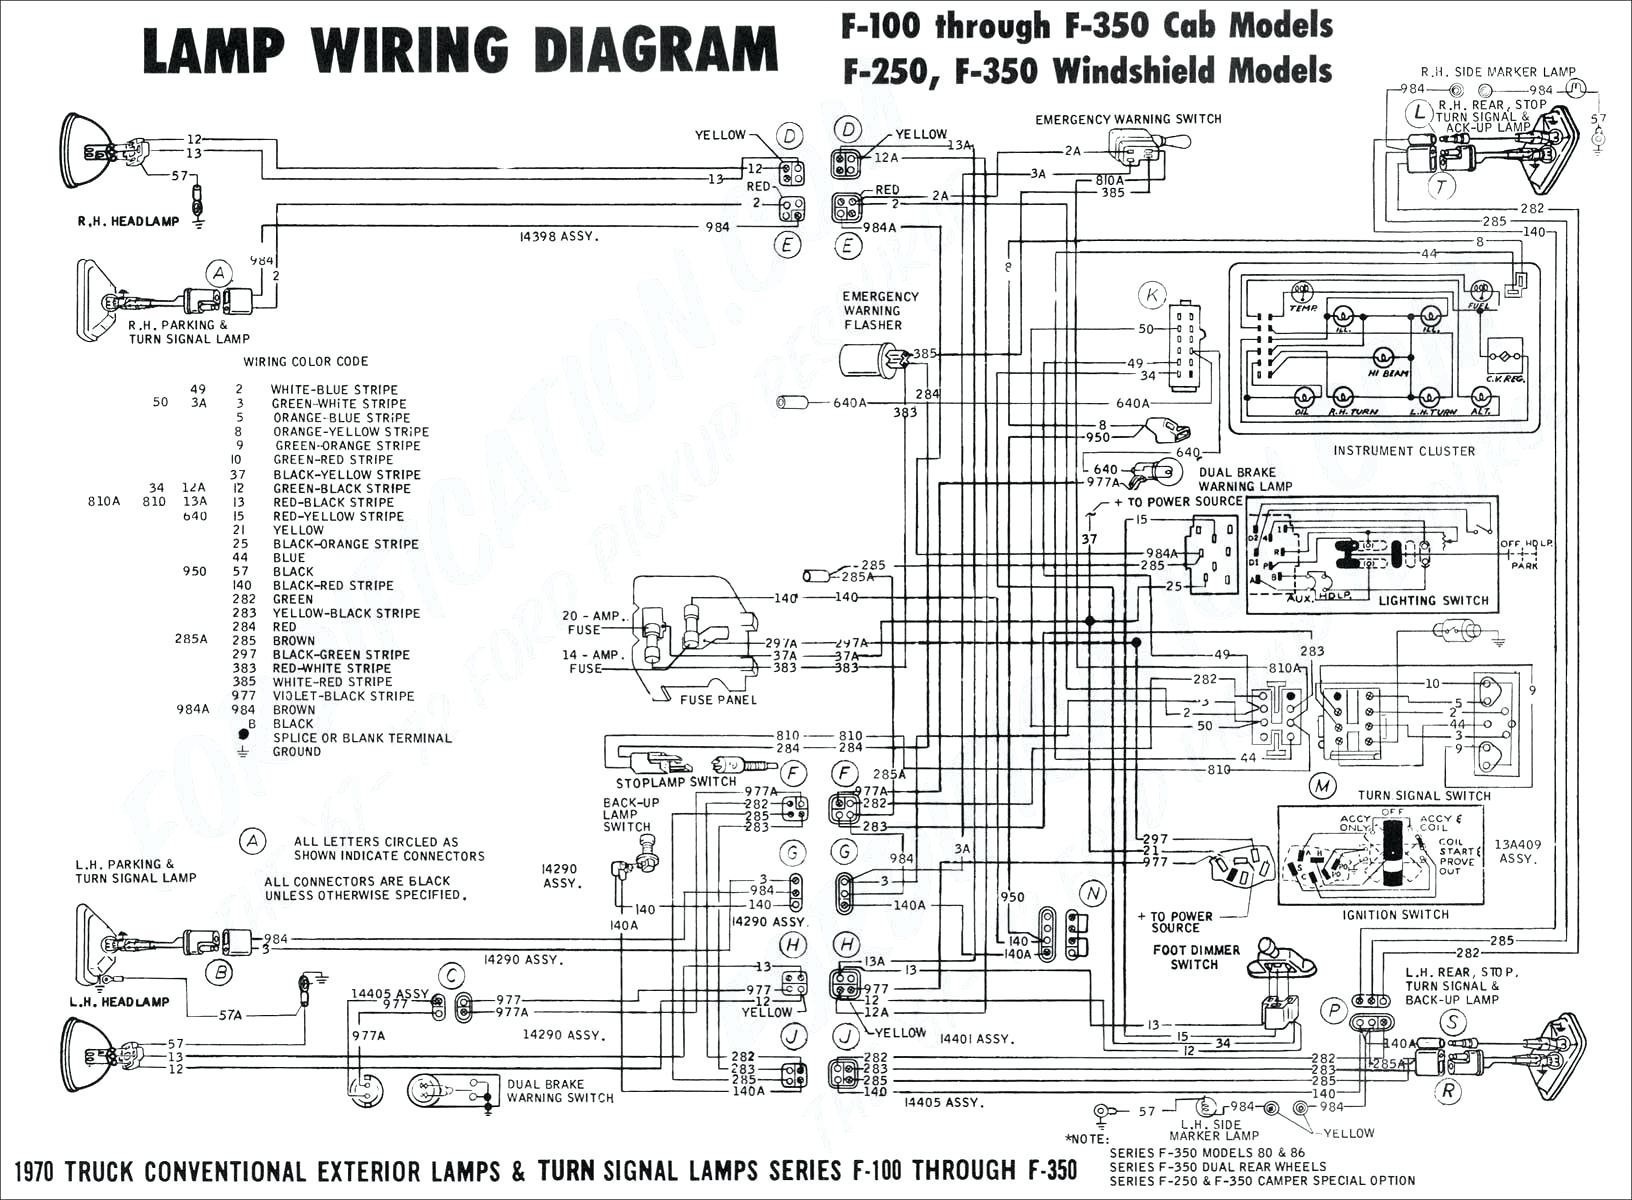 Boss Plow Wiring Diagram Truck Side Reference Boss Plow Wiring Diagram Truck Side Free Downloads Stop Turn Tail